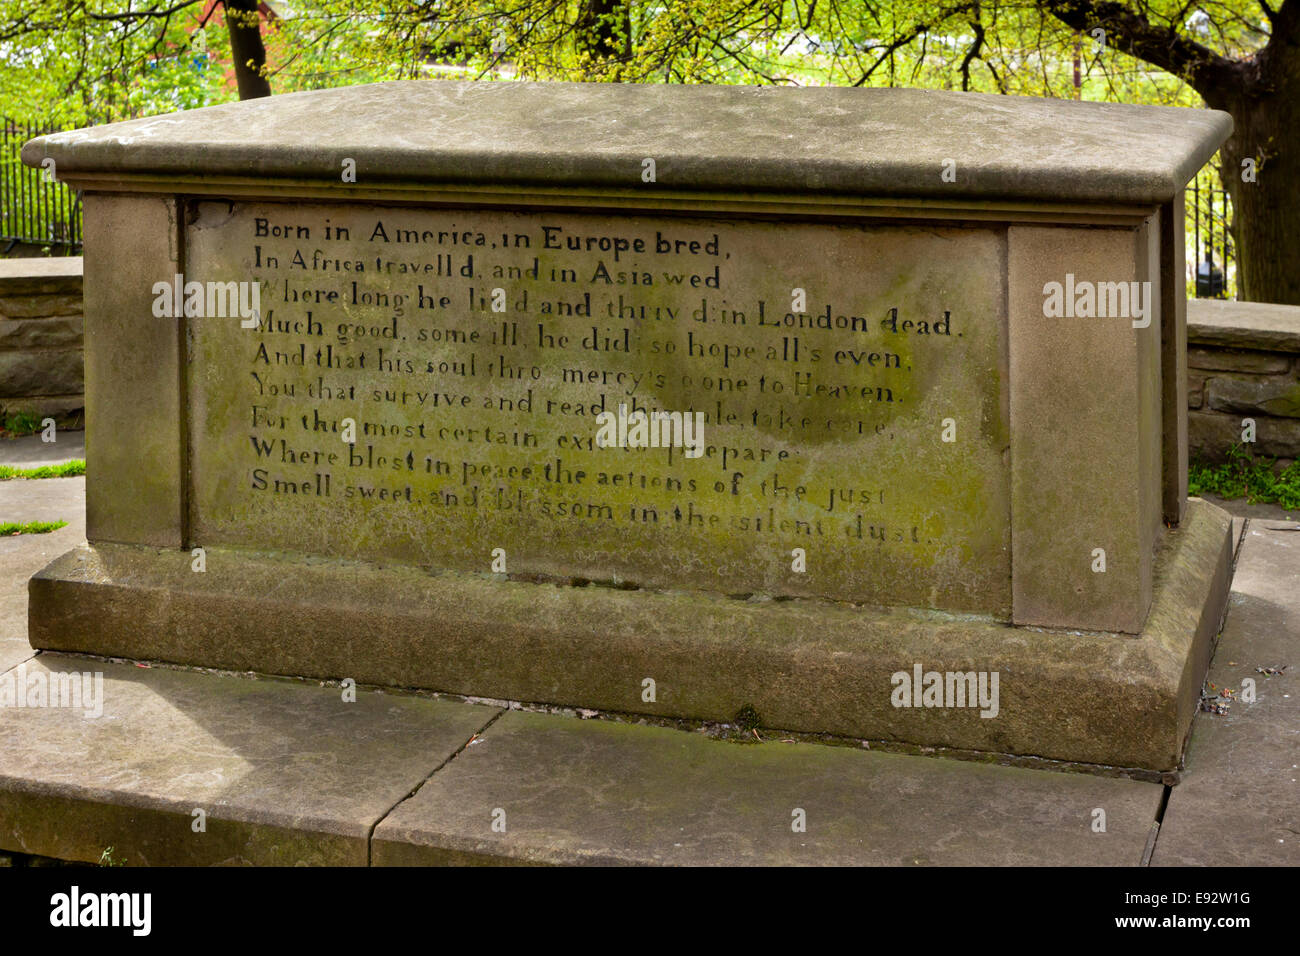 The grave of Elihu Yale after whom Yale University in the USA is named at St Giles Church Wrexham North Wales UK Stock Photo